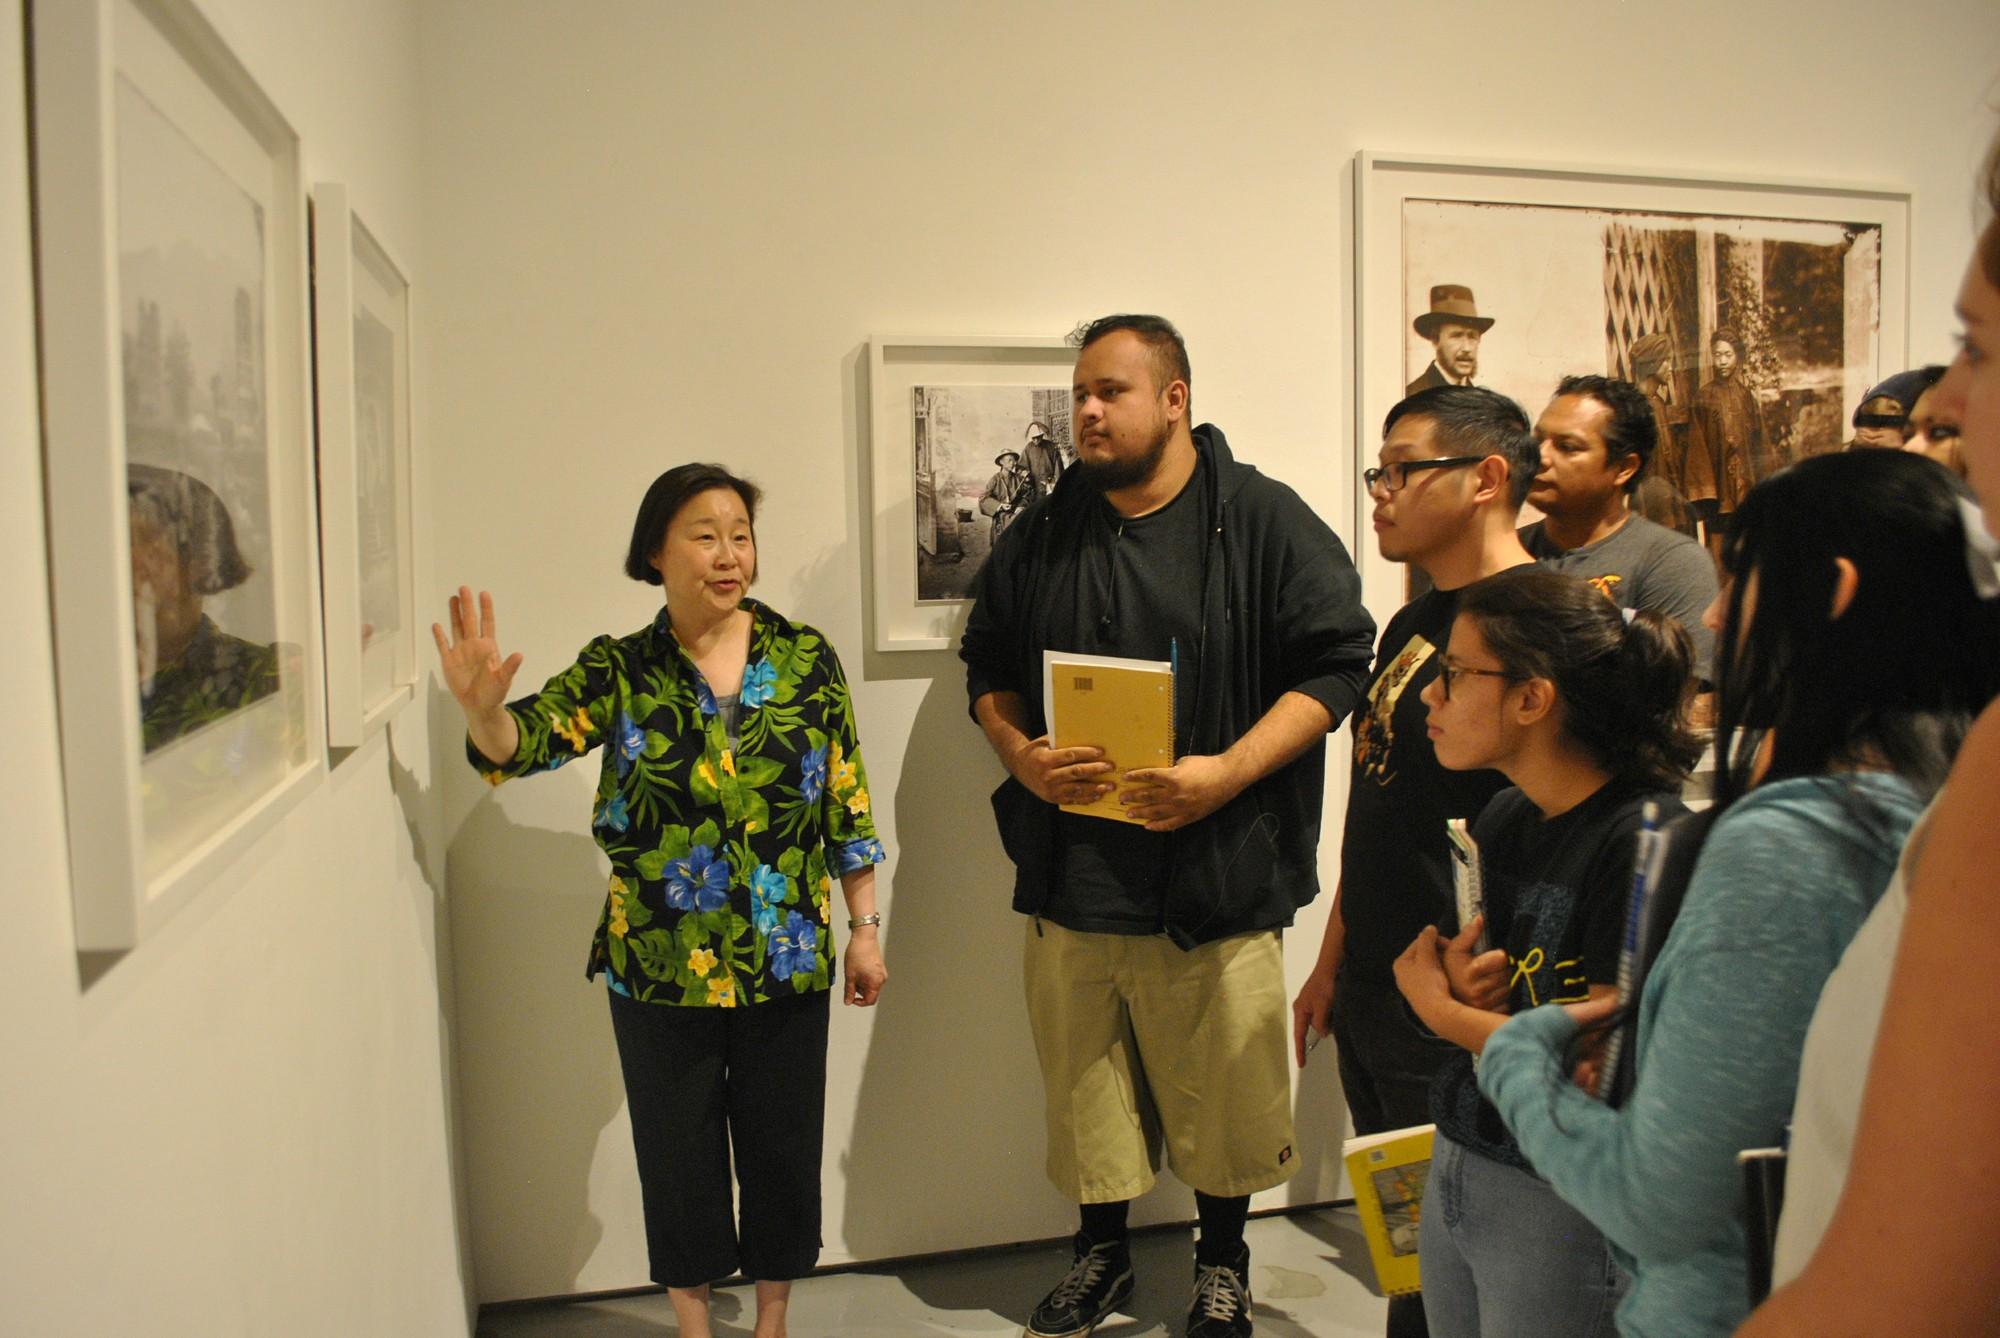 Exhibit curator explains a photo at a museum